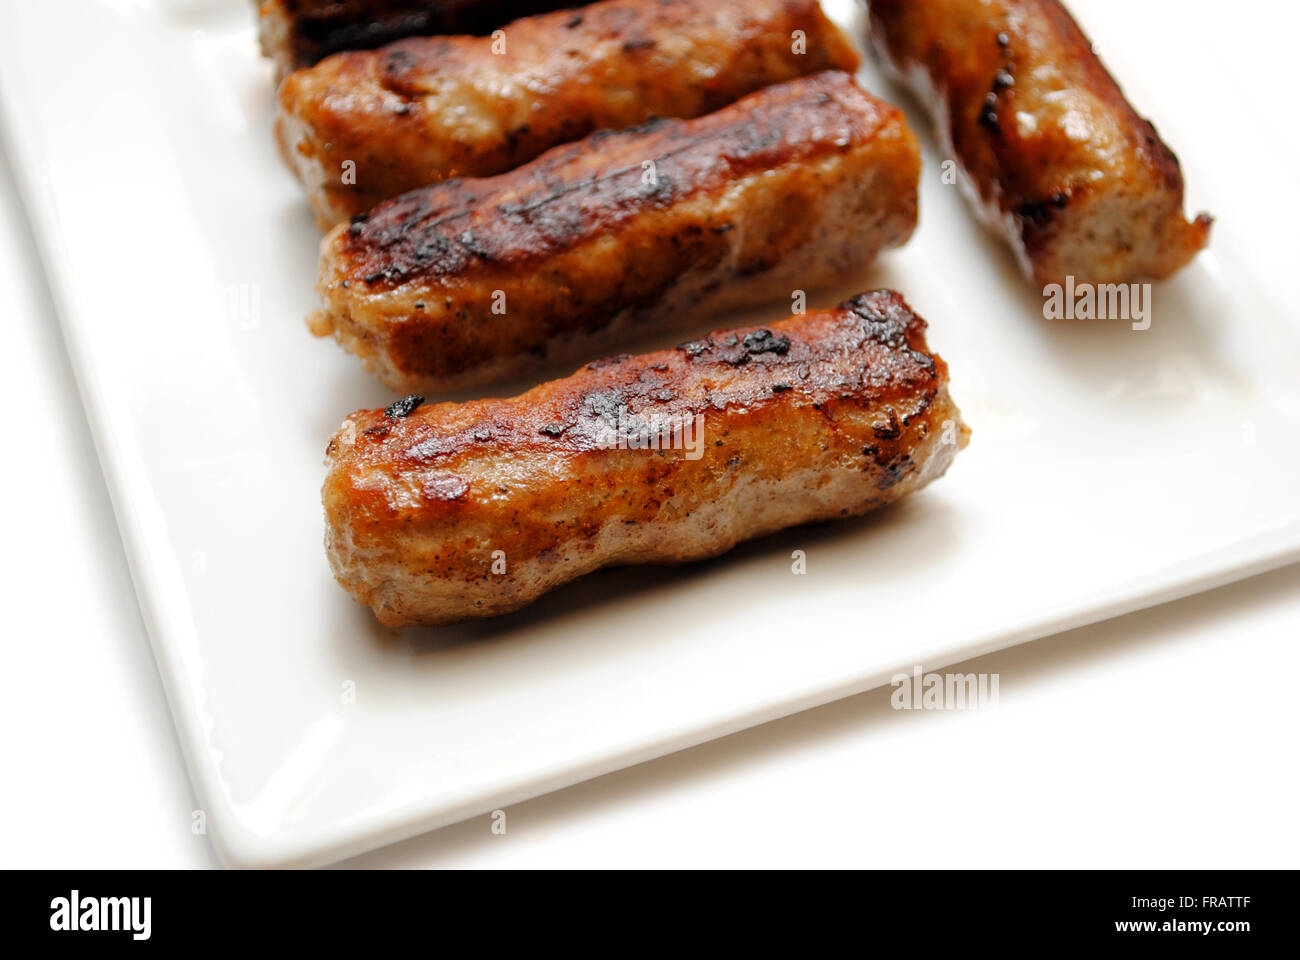 Fried Breakfast Link Sausage on a White Plate Stock Photo